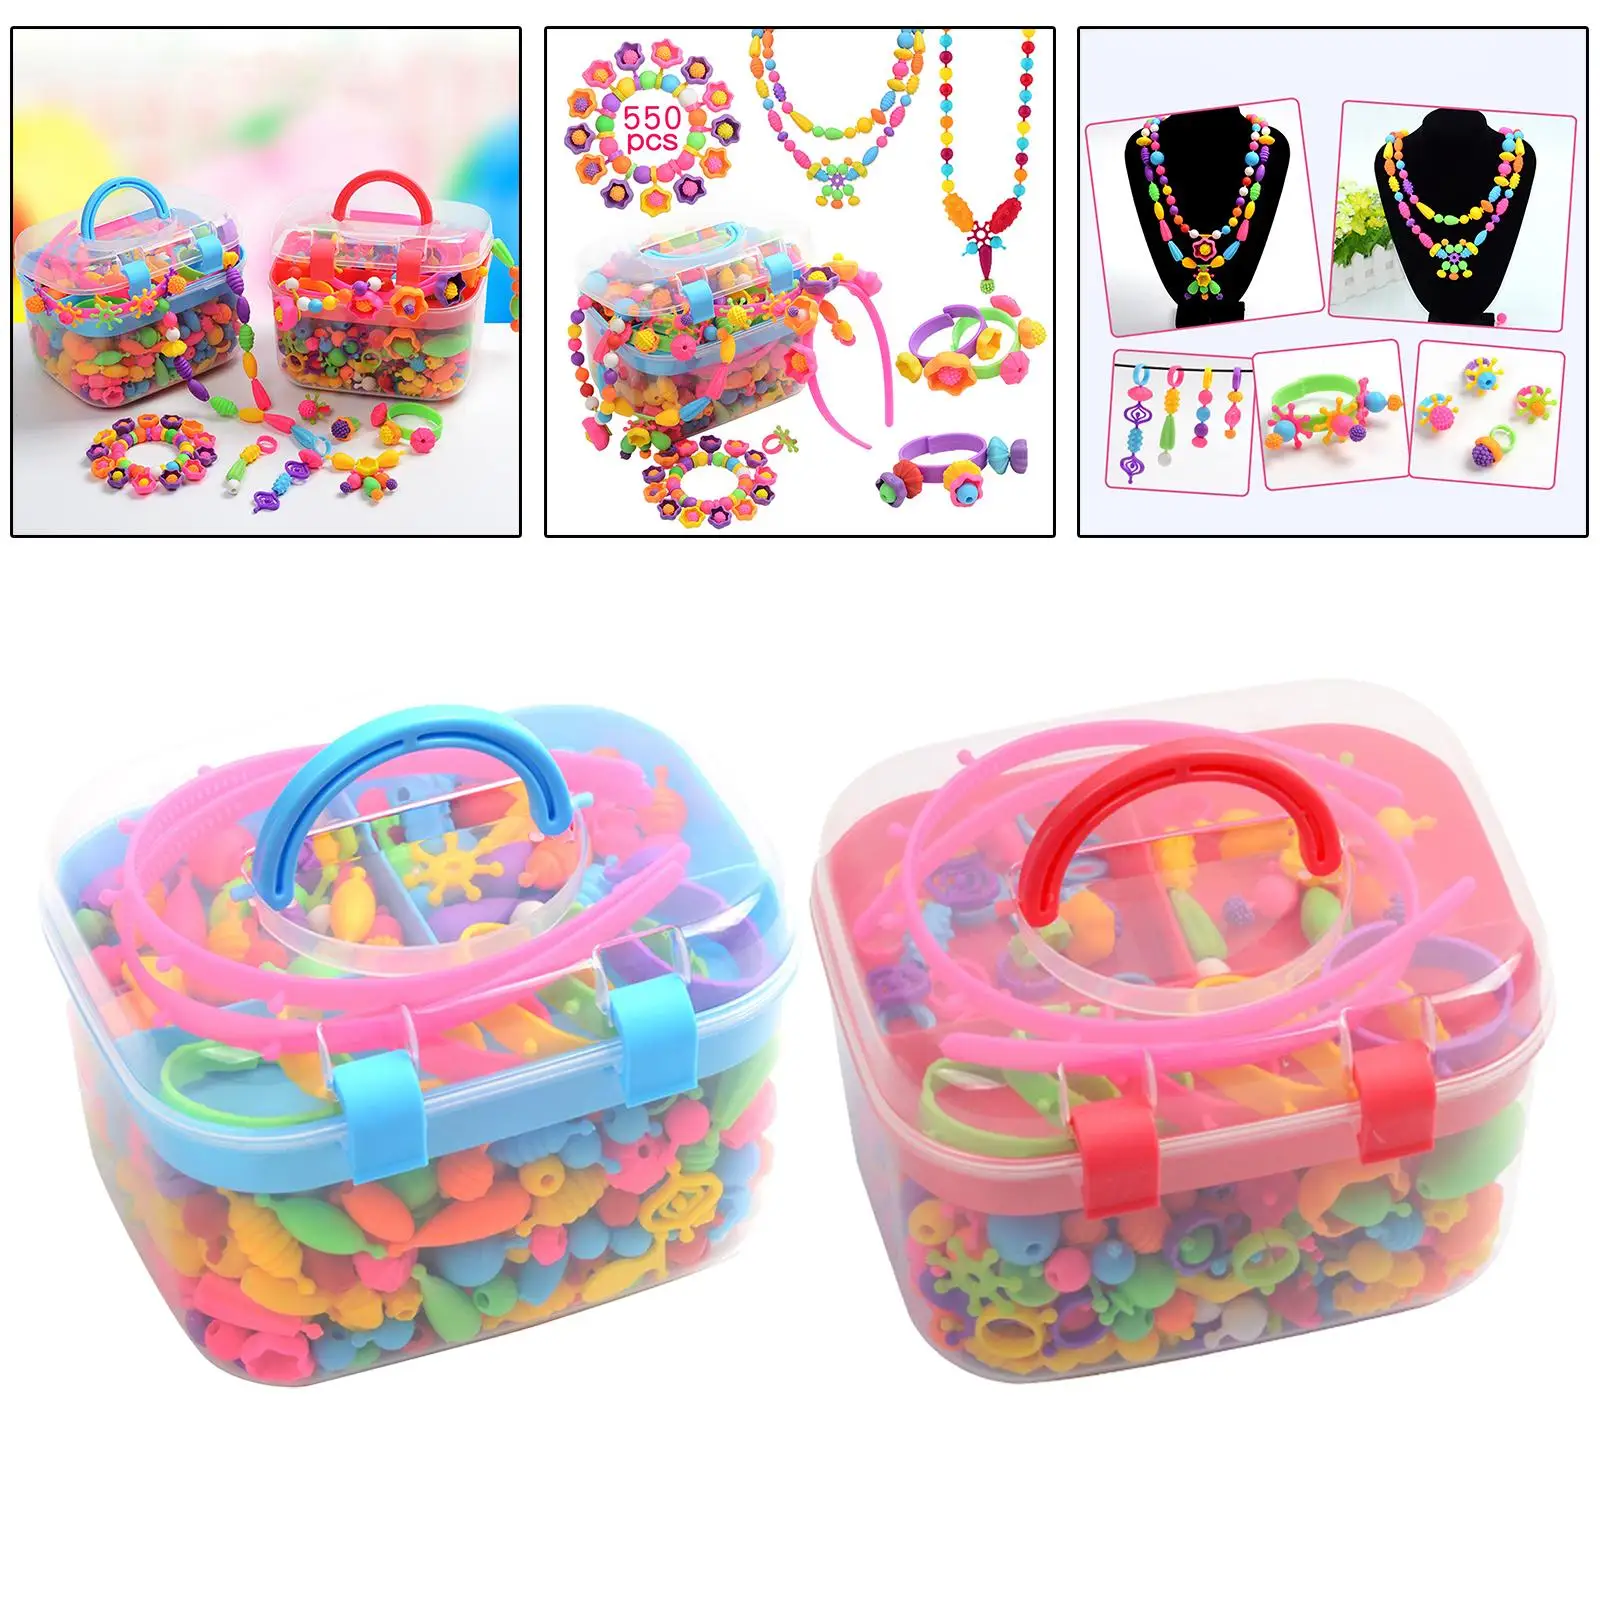 550pcs Pop Beads DIY Kids Jewelry Making Kit Jewelry Set Toys Crafts Arts Snap Together Beads for Hairband Earrings Girls